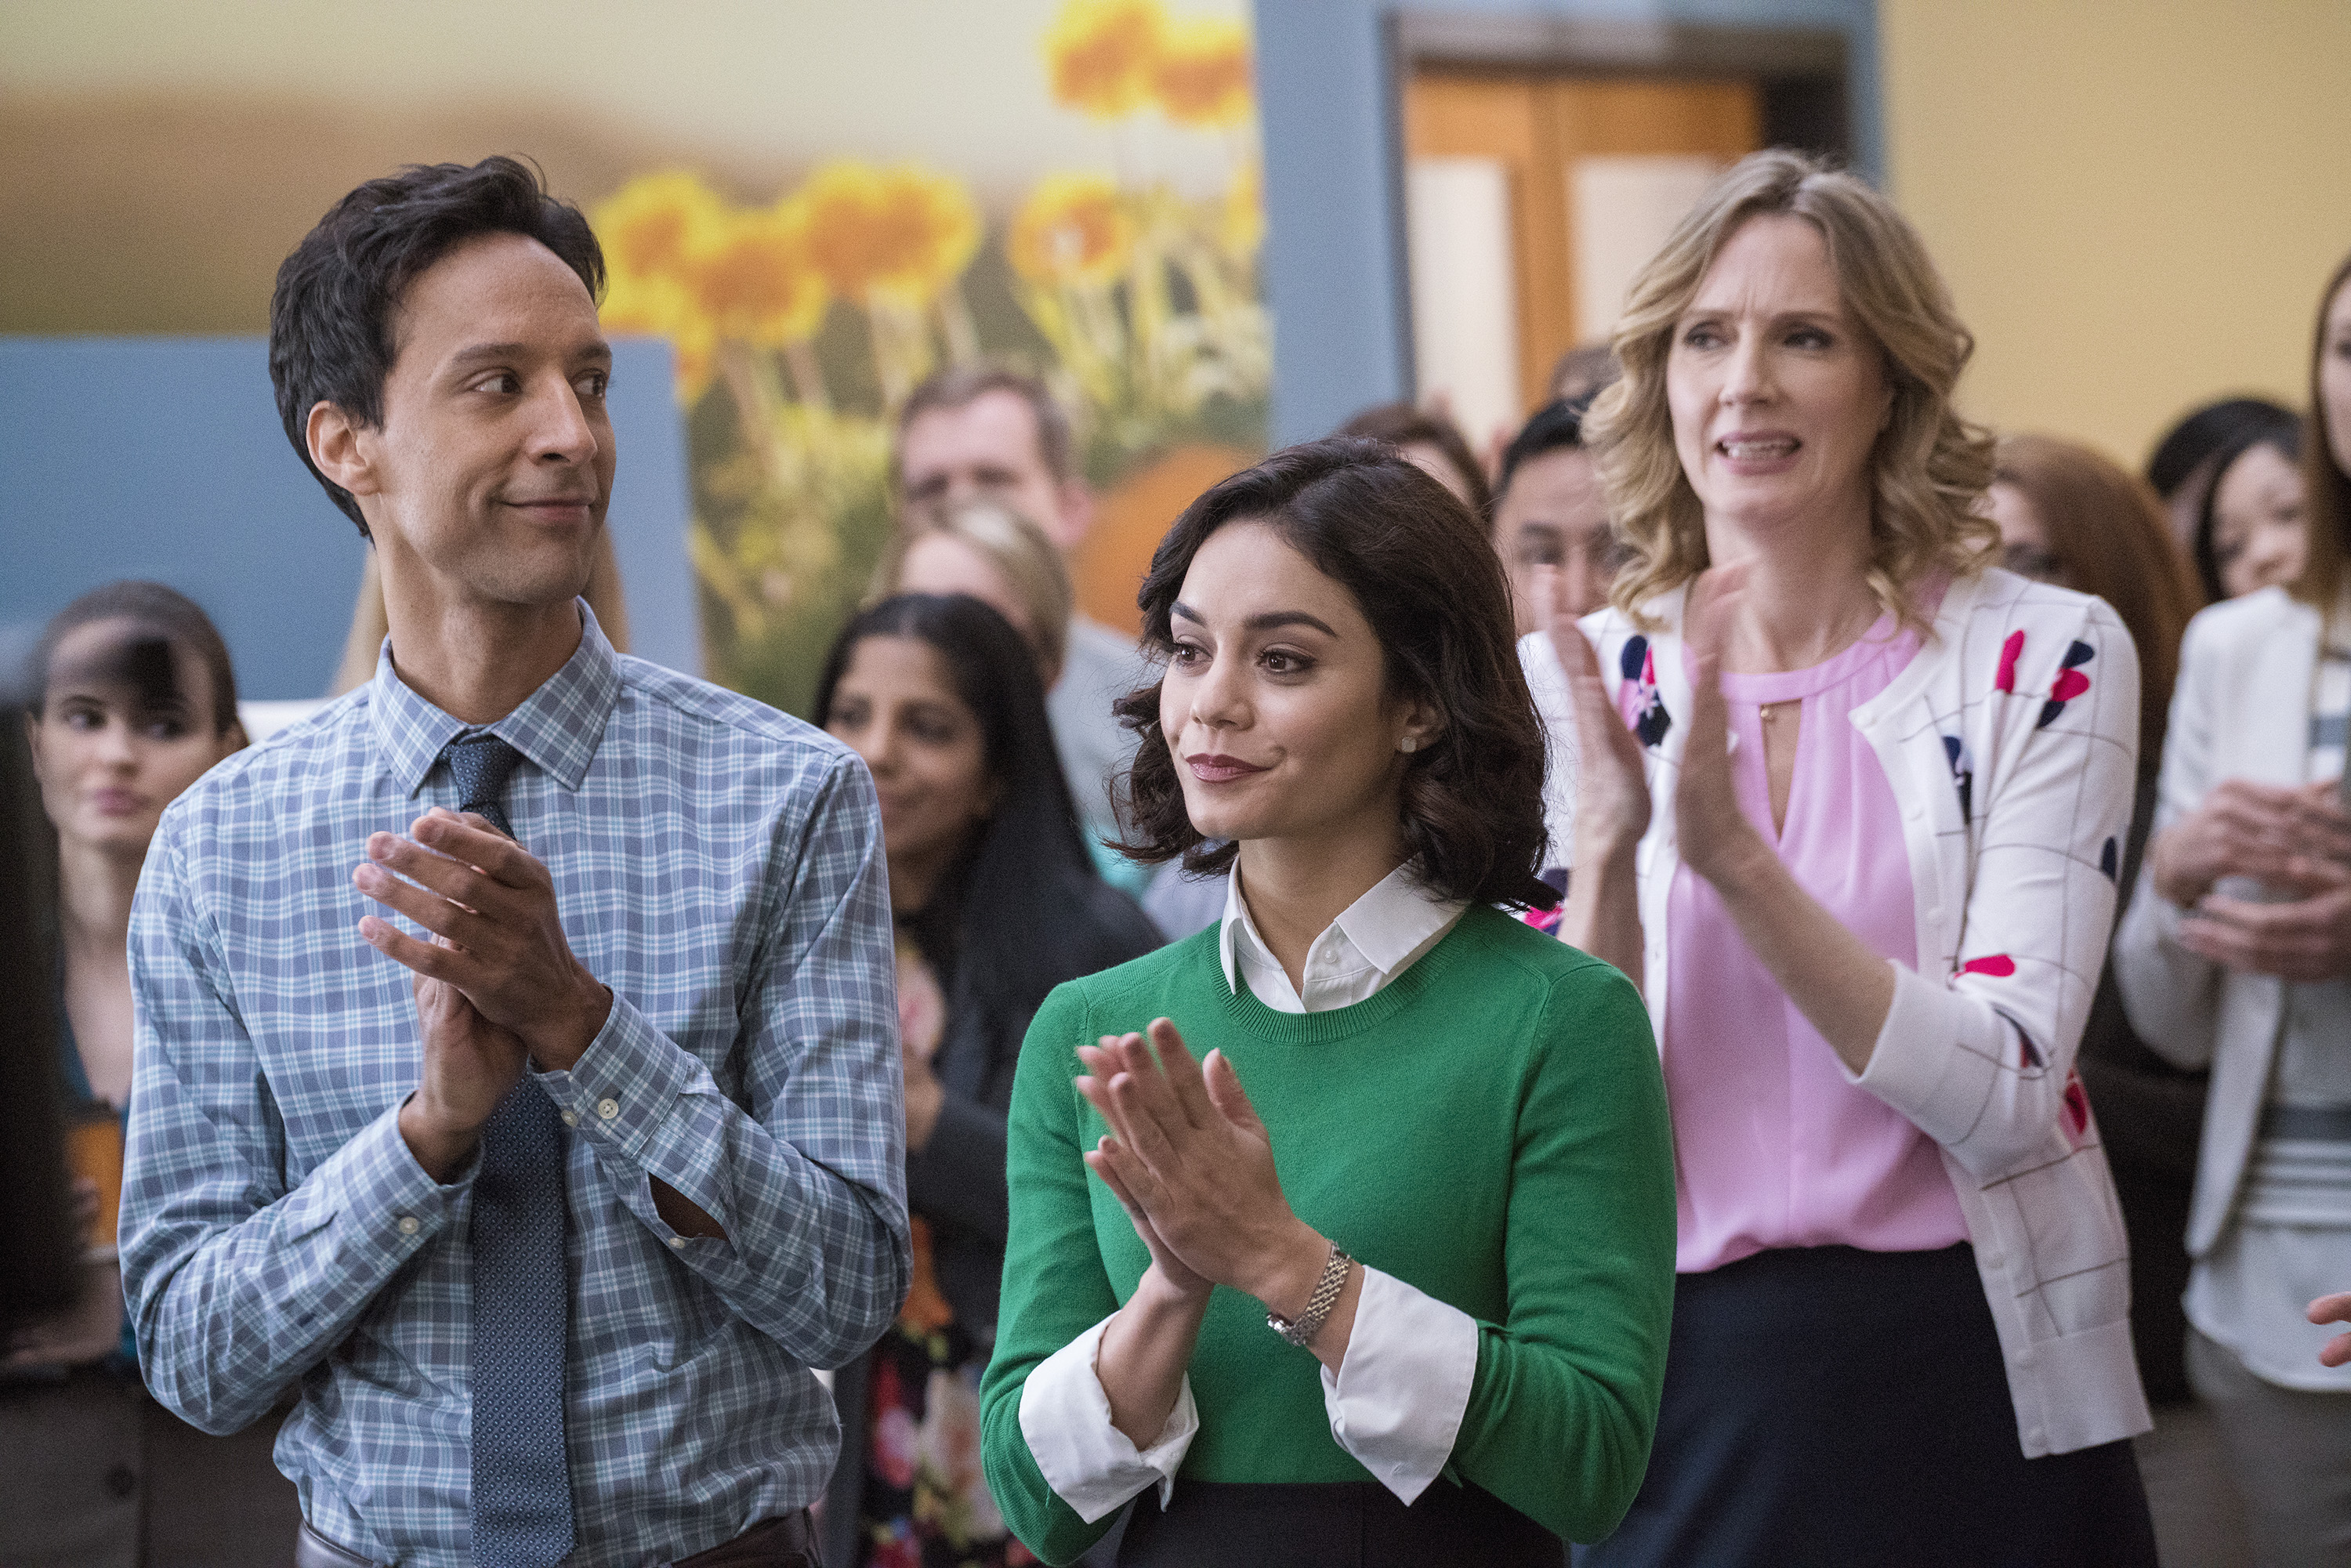 Press Record: The New Fall 2016 Shows to Watch - Powerless on NBC